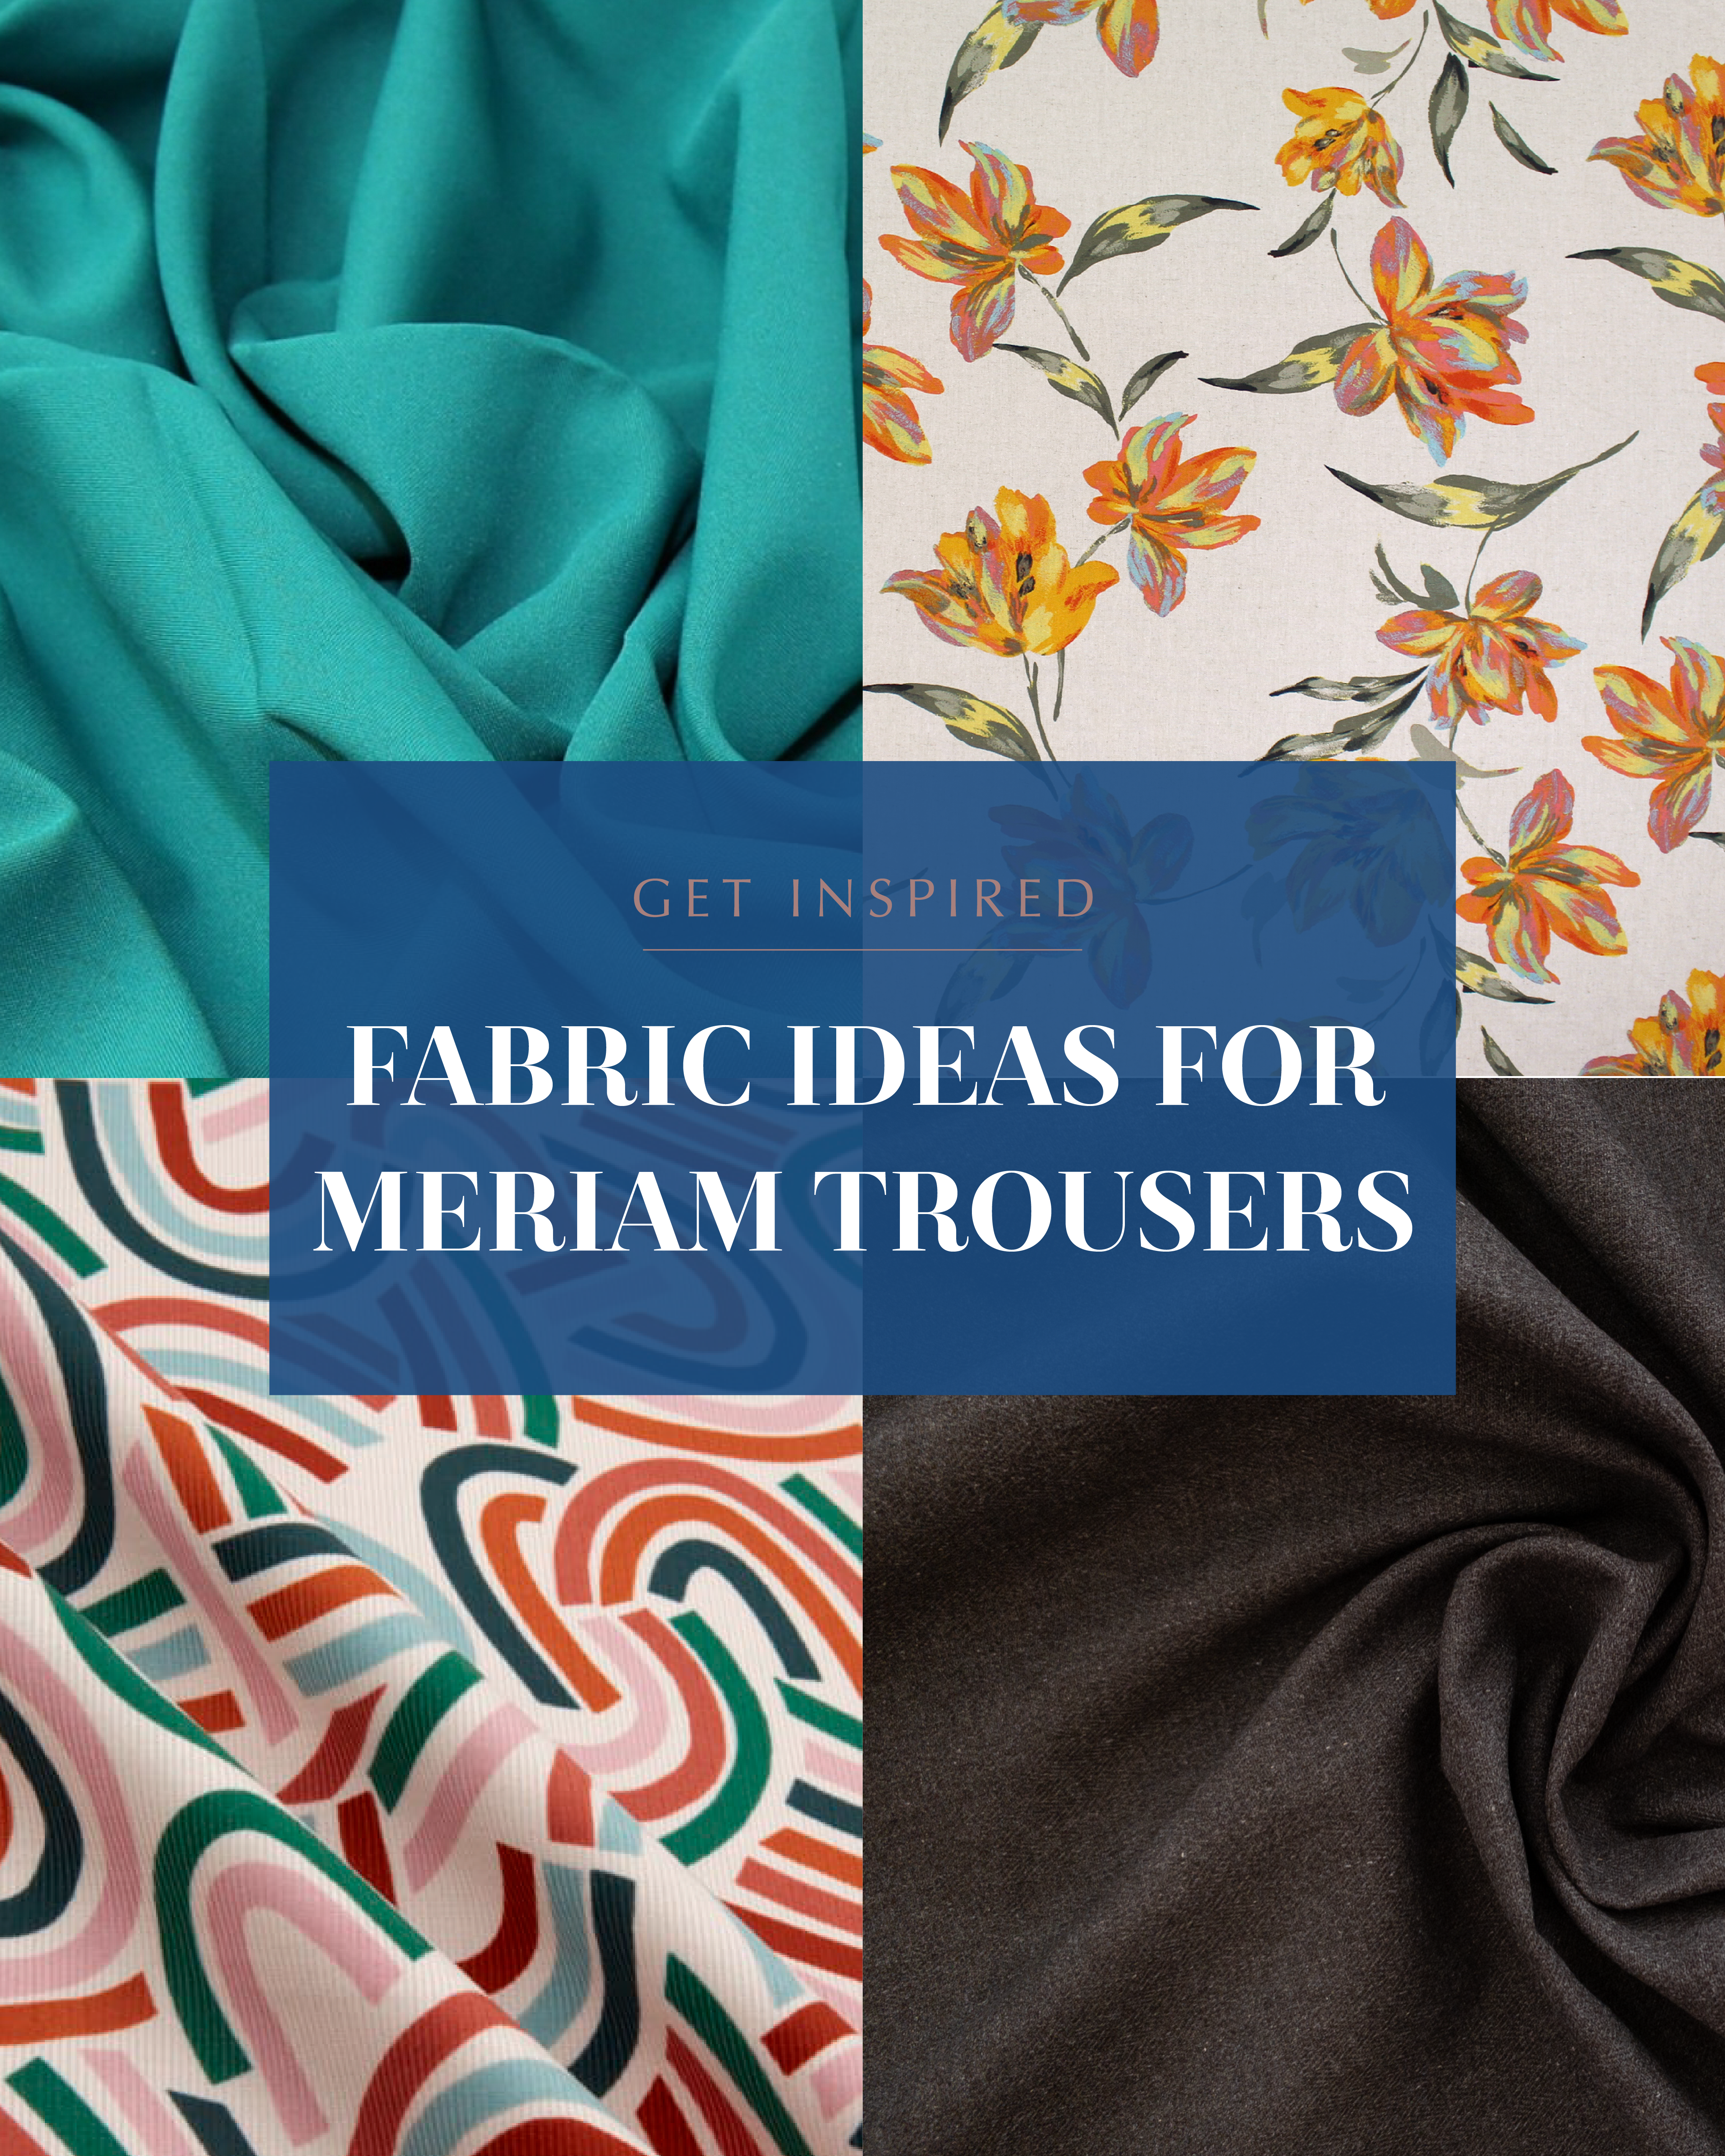 Fabric Ideas for the Meriam Trousers